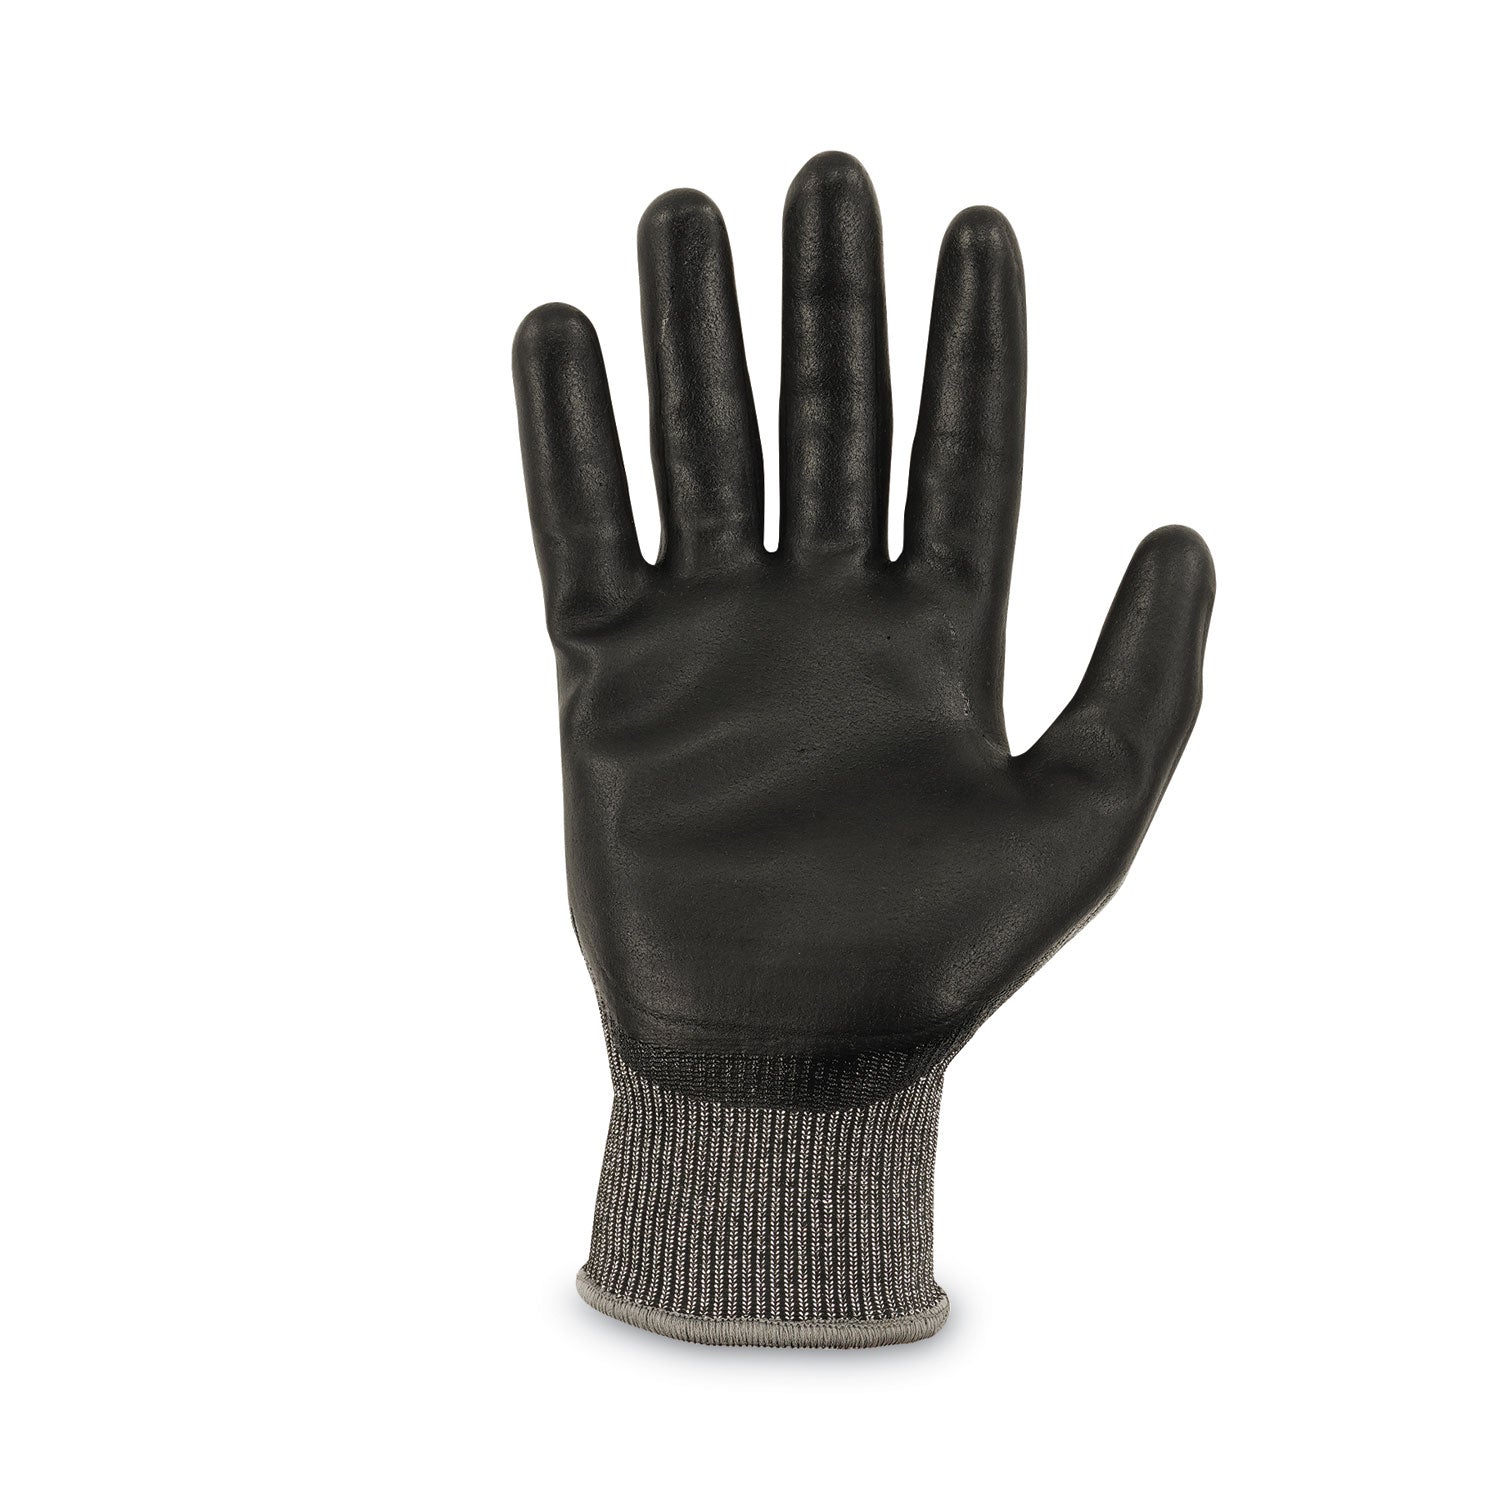 proflex-7072-ansi-a7-nitrile-coated-cr-gloves-gray-2x-large-pair-ships-in-1-3-business-days_ego10316 - 6